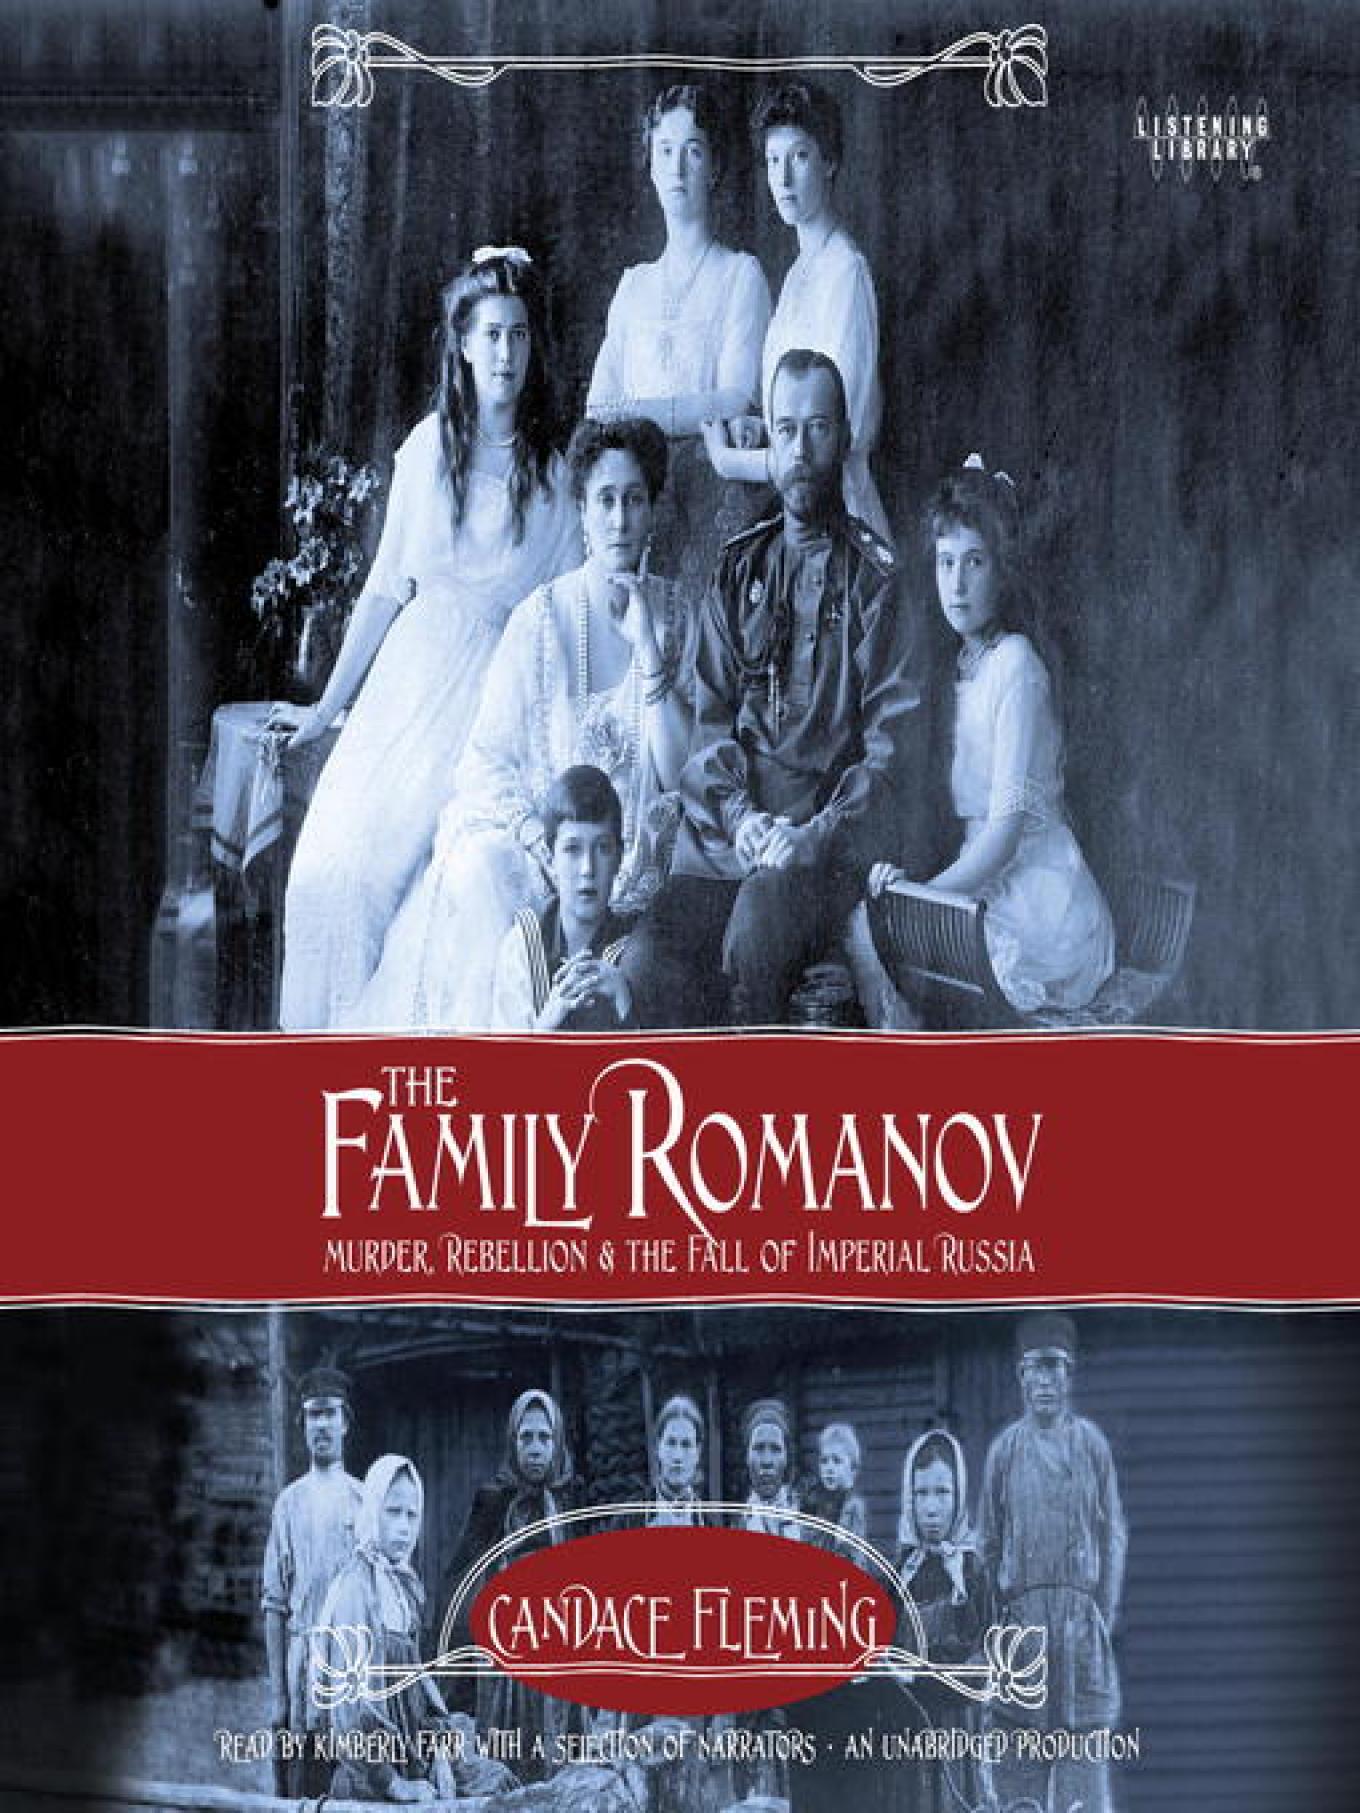 Romanov: Murder, Rebellion and the Fall of Imperial Russia